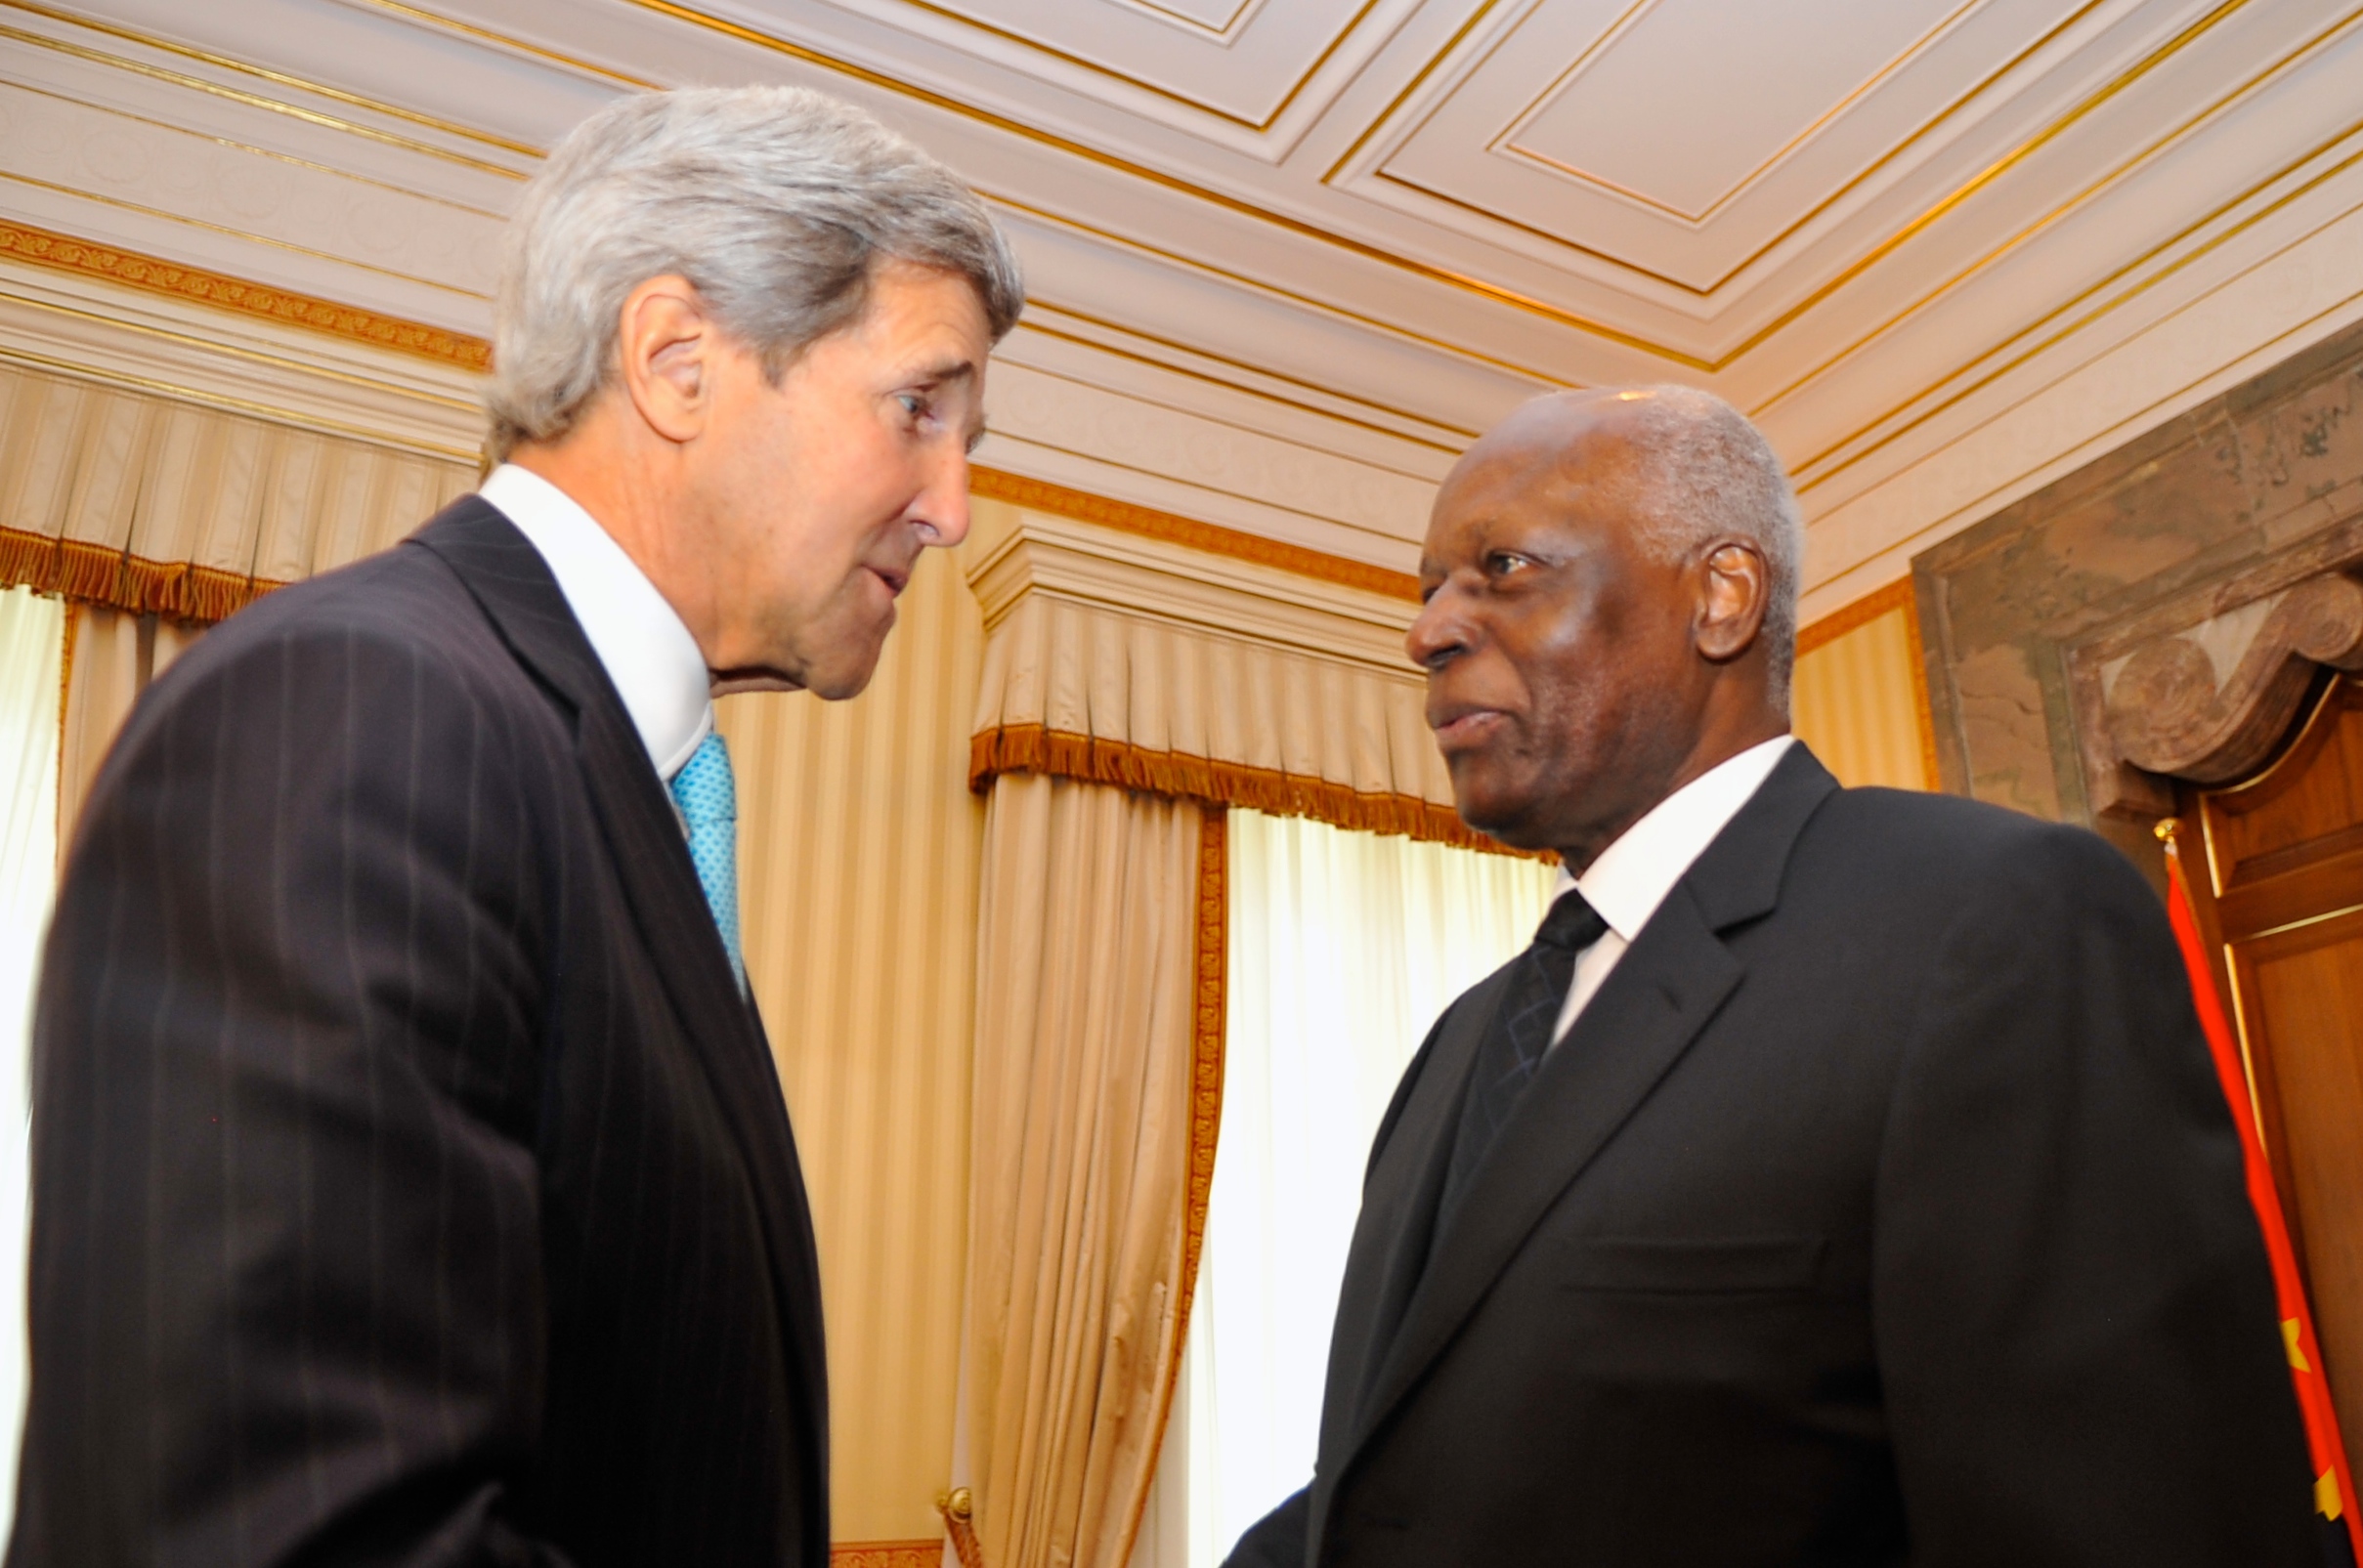 Having held power since 1979, Angolan President José Eduardo dos Santos (pictured here with former US Secretary of State John Kerry) bows out amid controversy